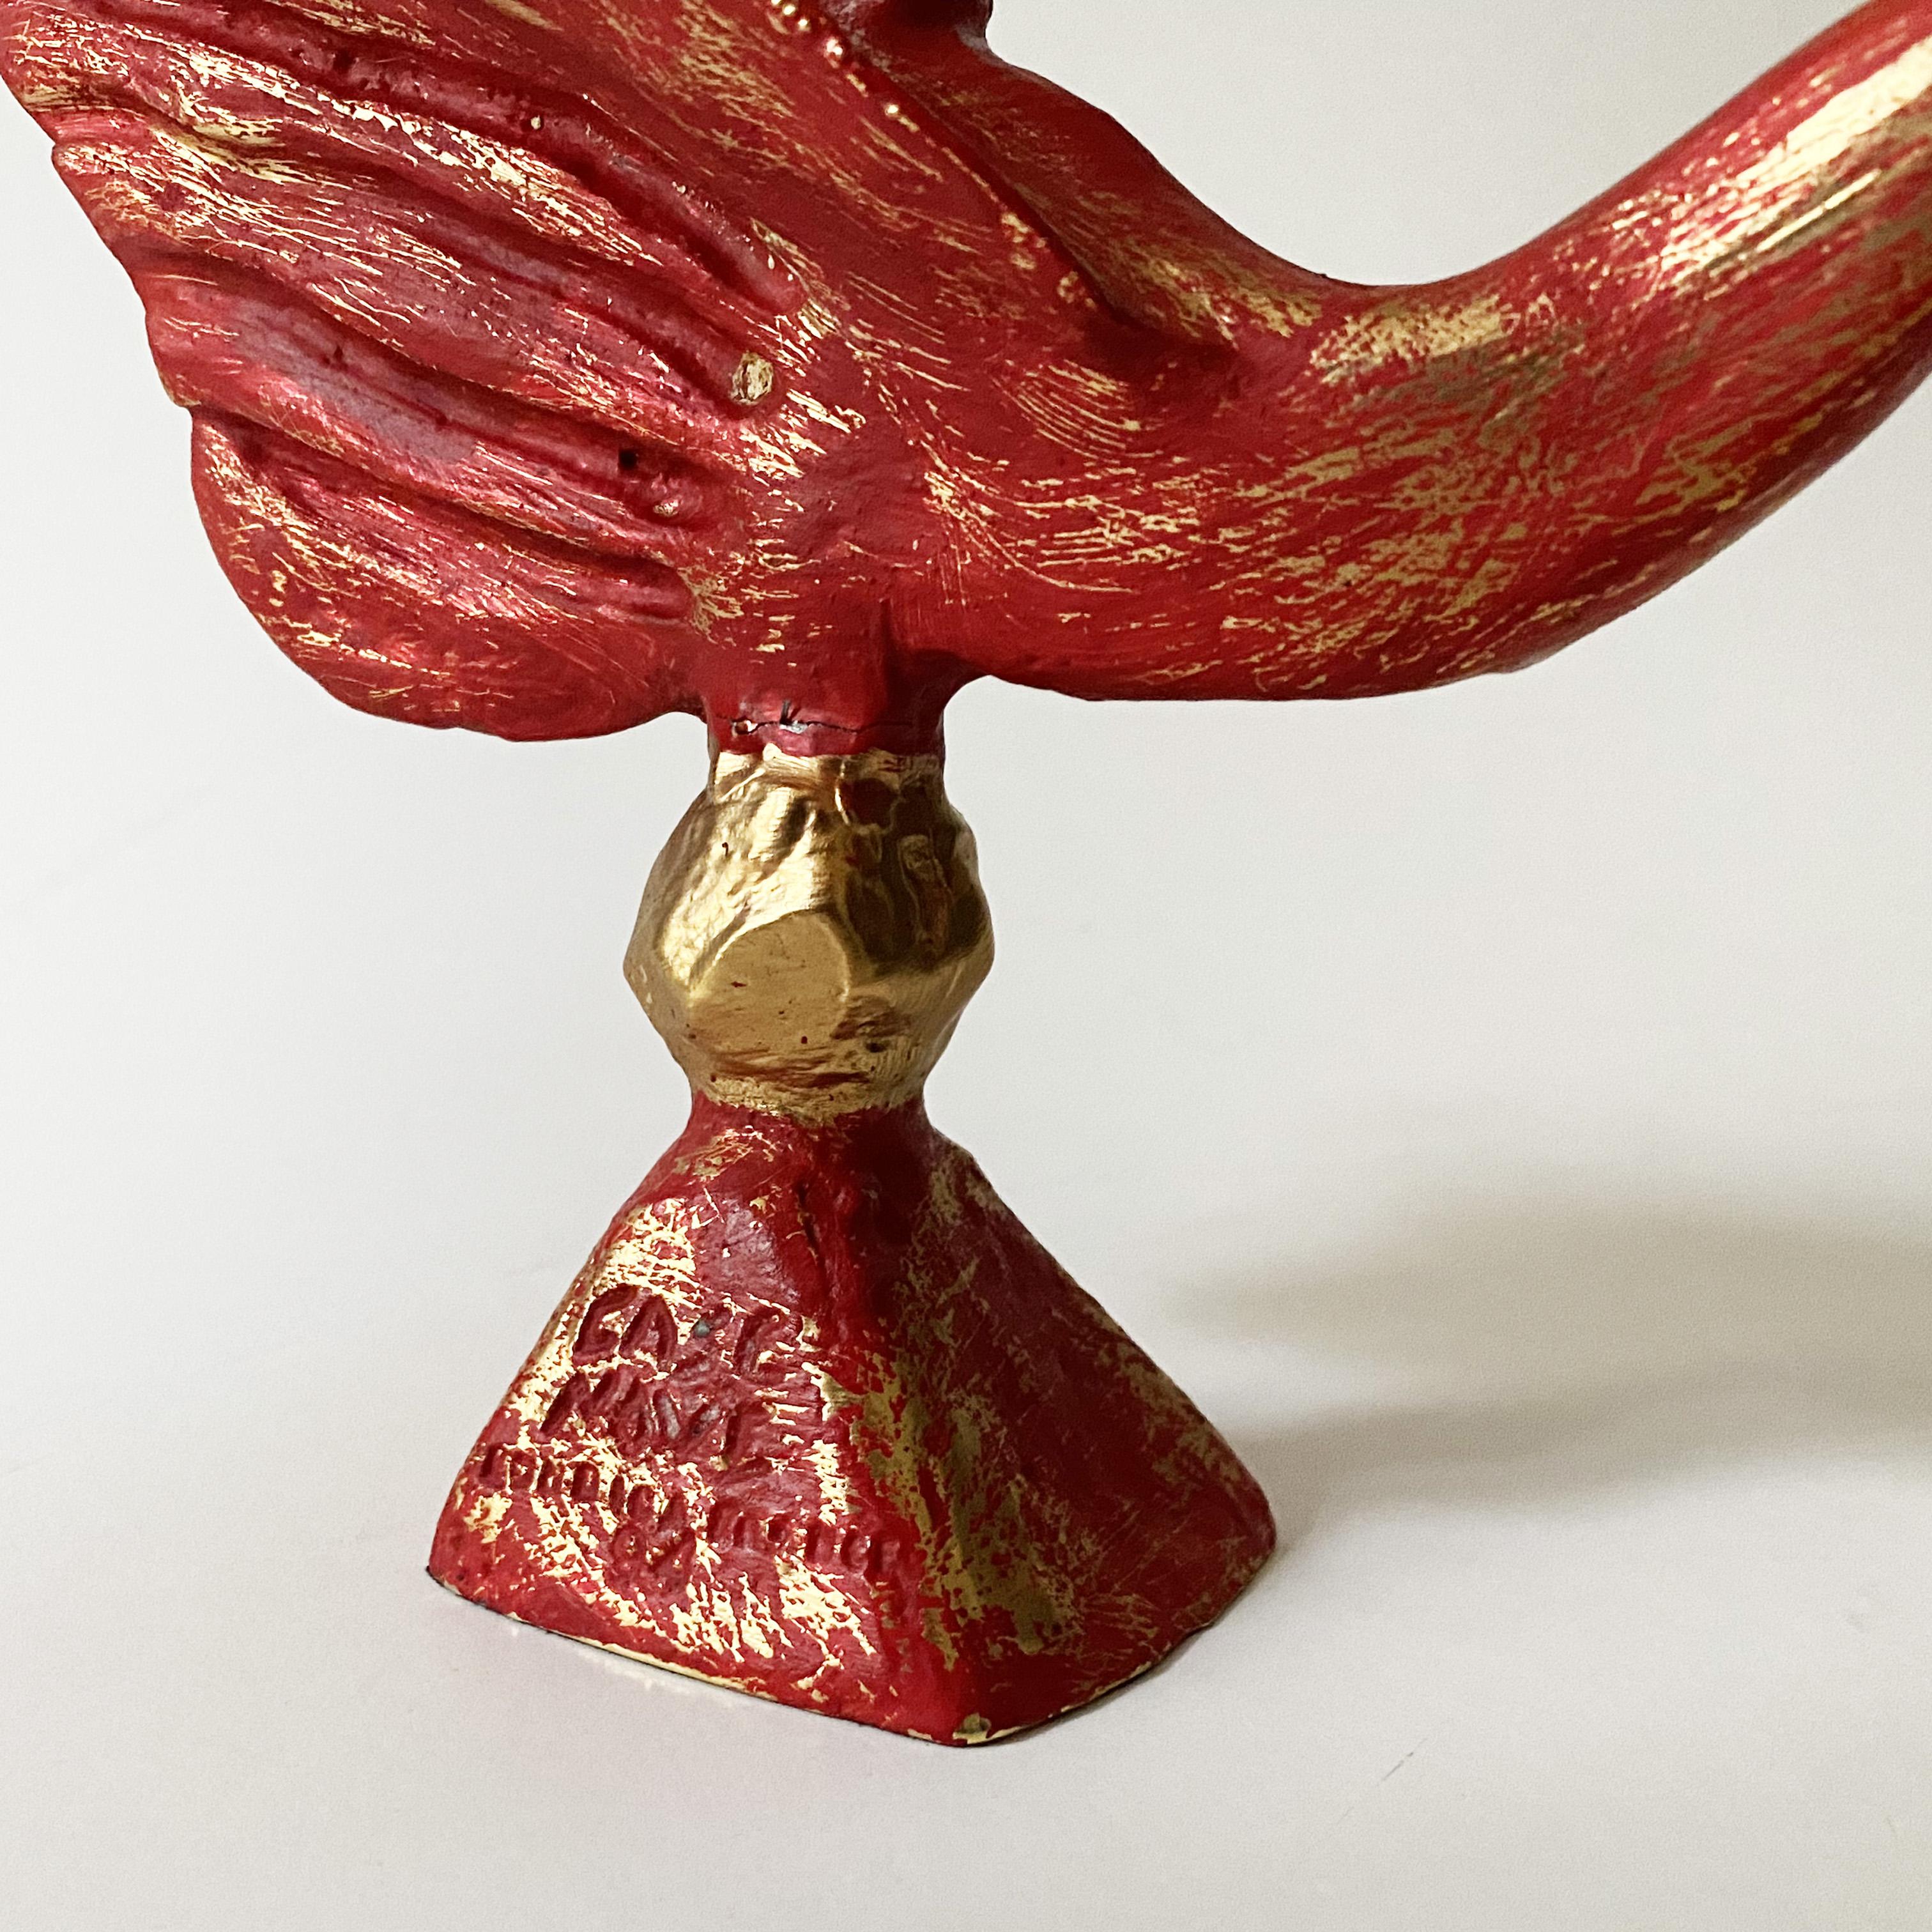 Brutalist Gilded & Red Sculptural Bird Candlestick by Pierre Casenove for Fondica, 1990s. For Sale